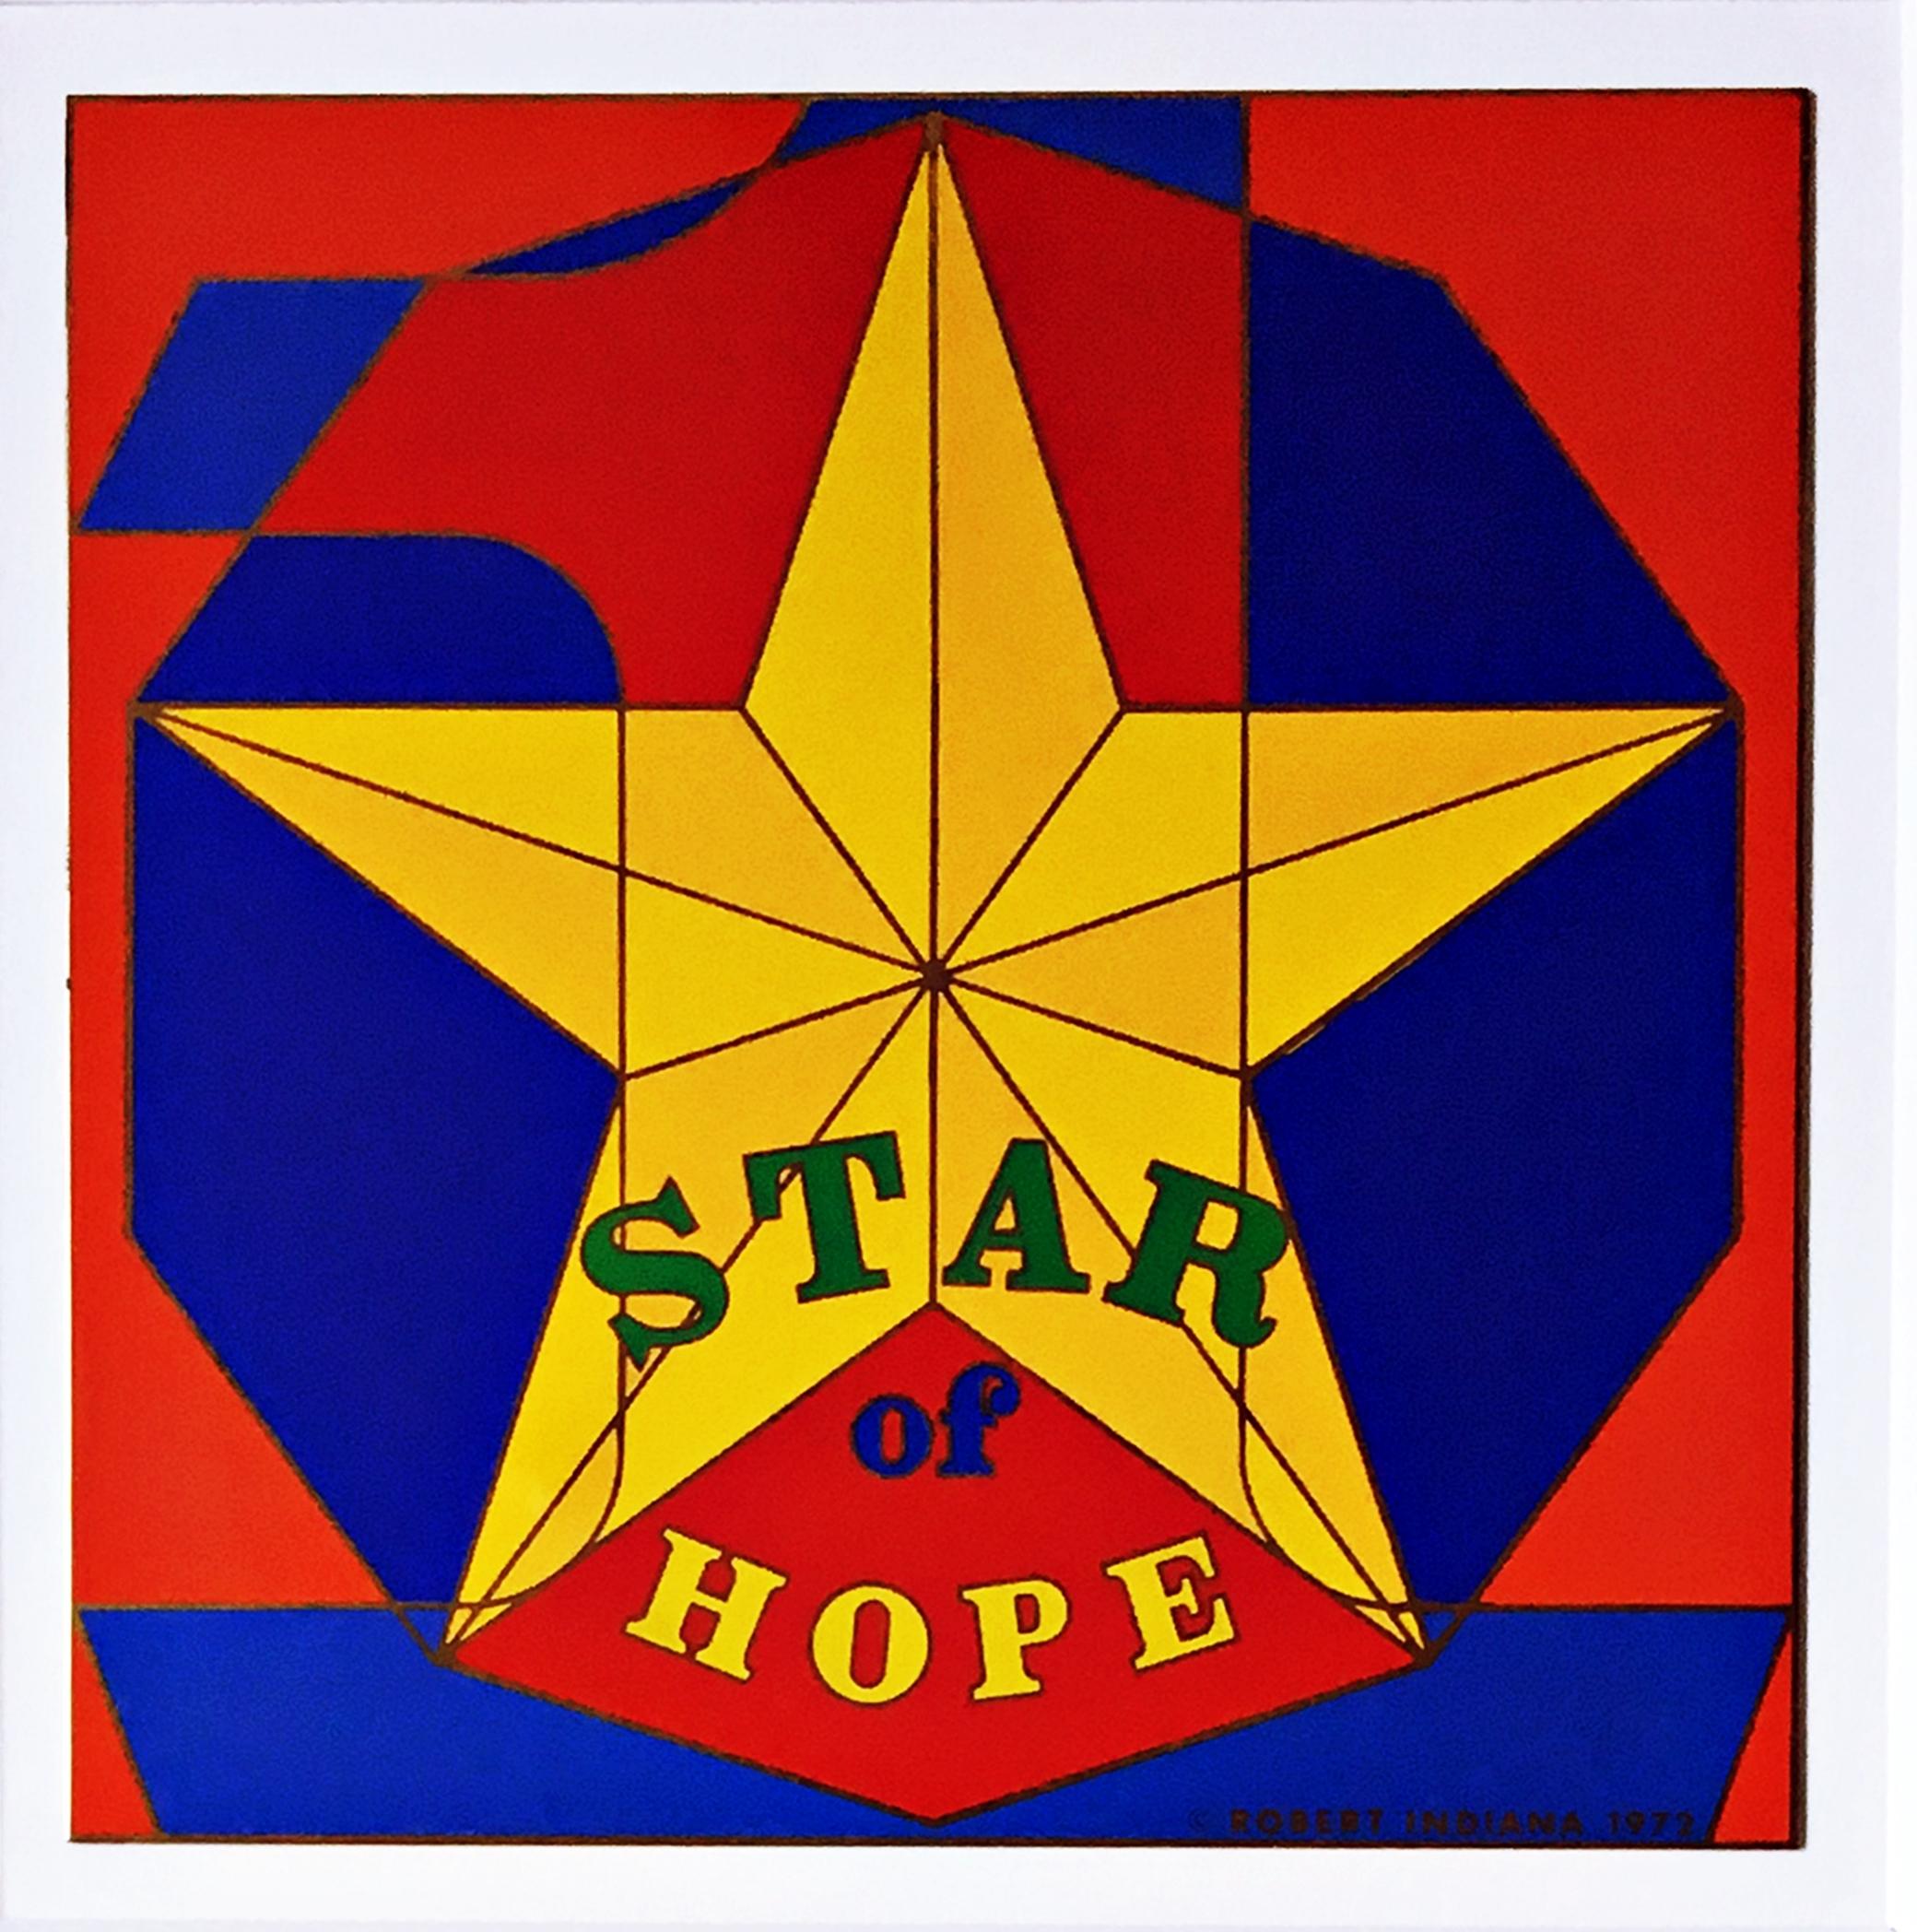 Star of Hope, enamel on metal plaque with stamped name and copyright, Framed - Mixed Media Art by Robert Indiana